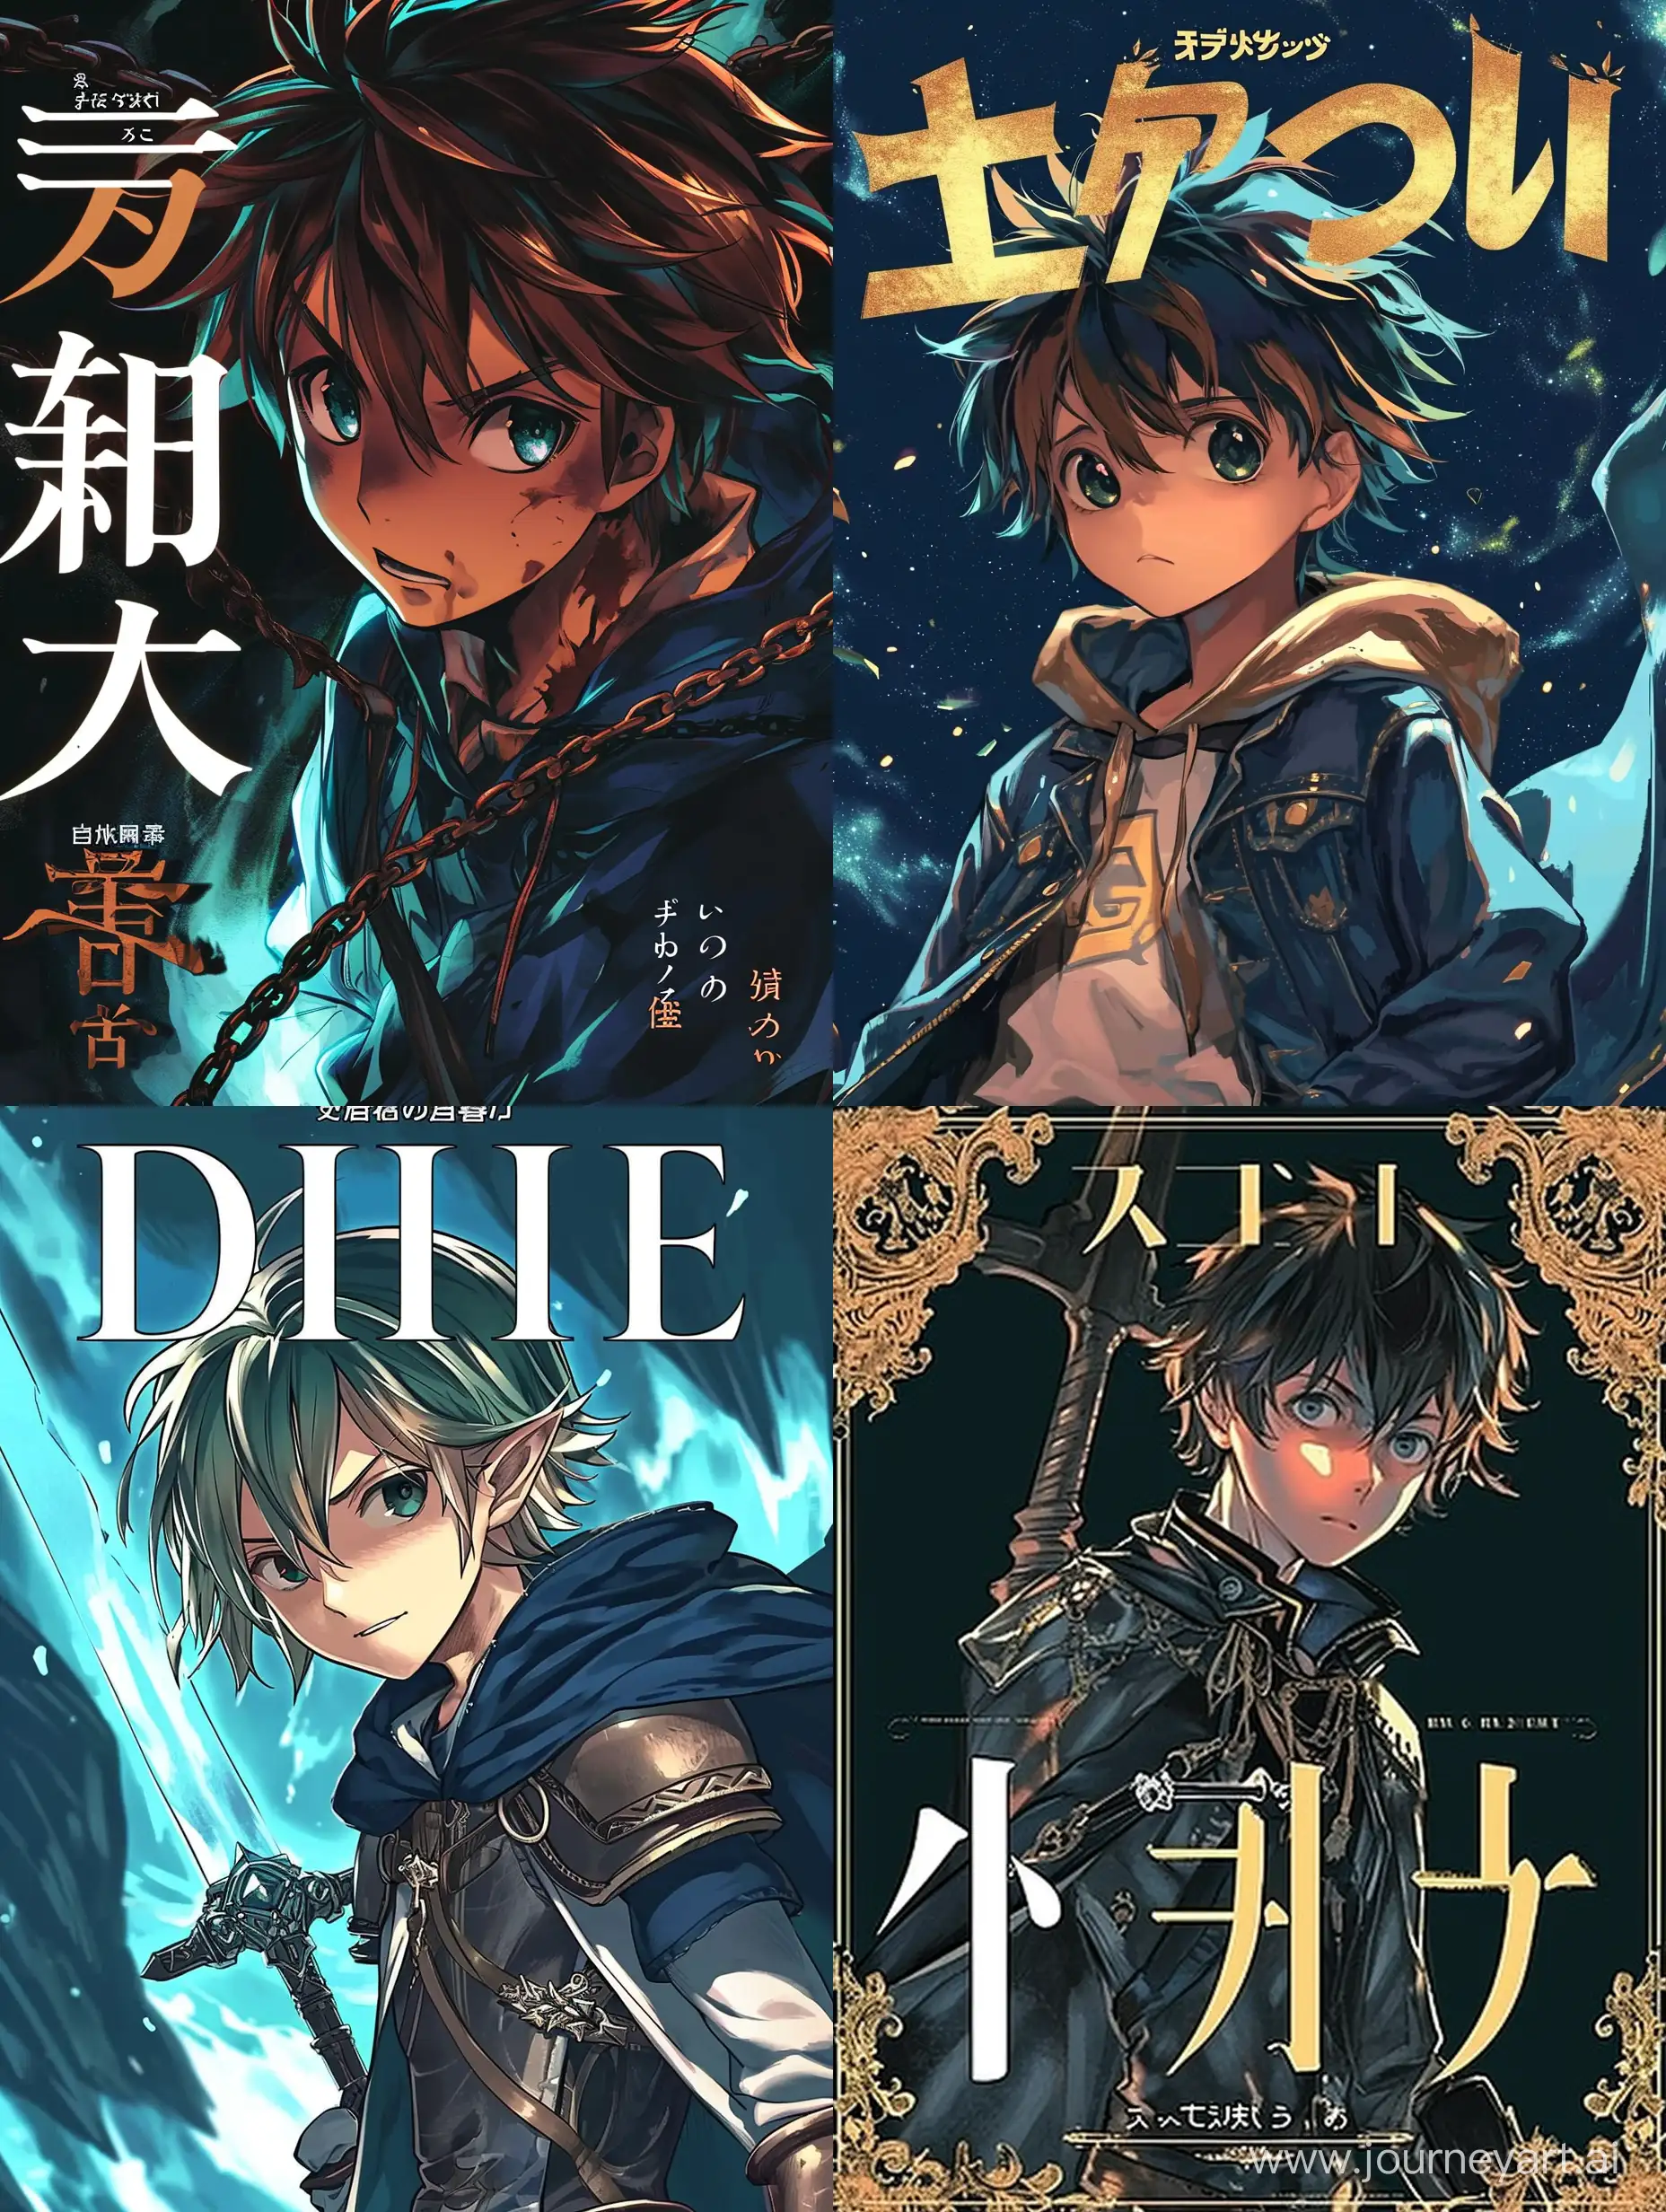 the cover for light novel, boy, genres: isekai and fantasy